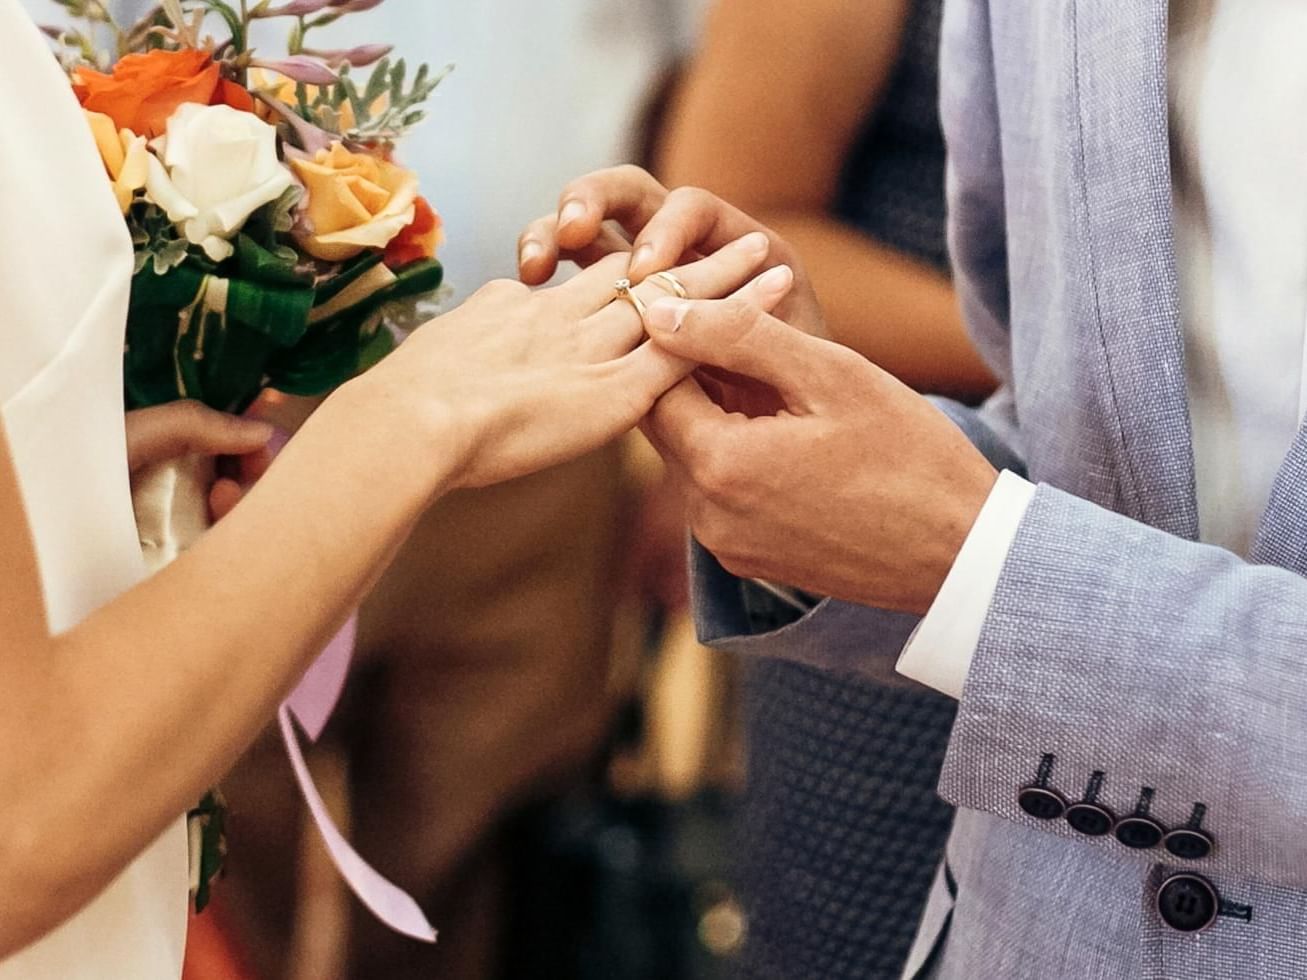 Wedding Reception vs. Ceremony: Here Are the Differences